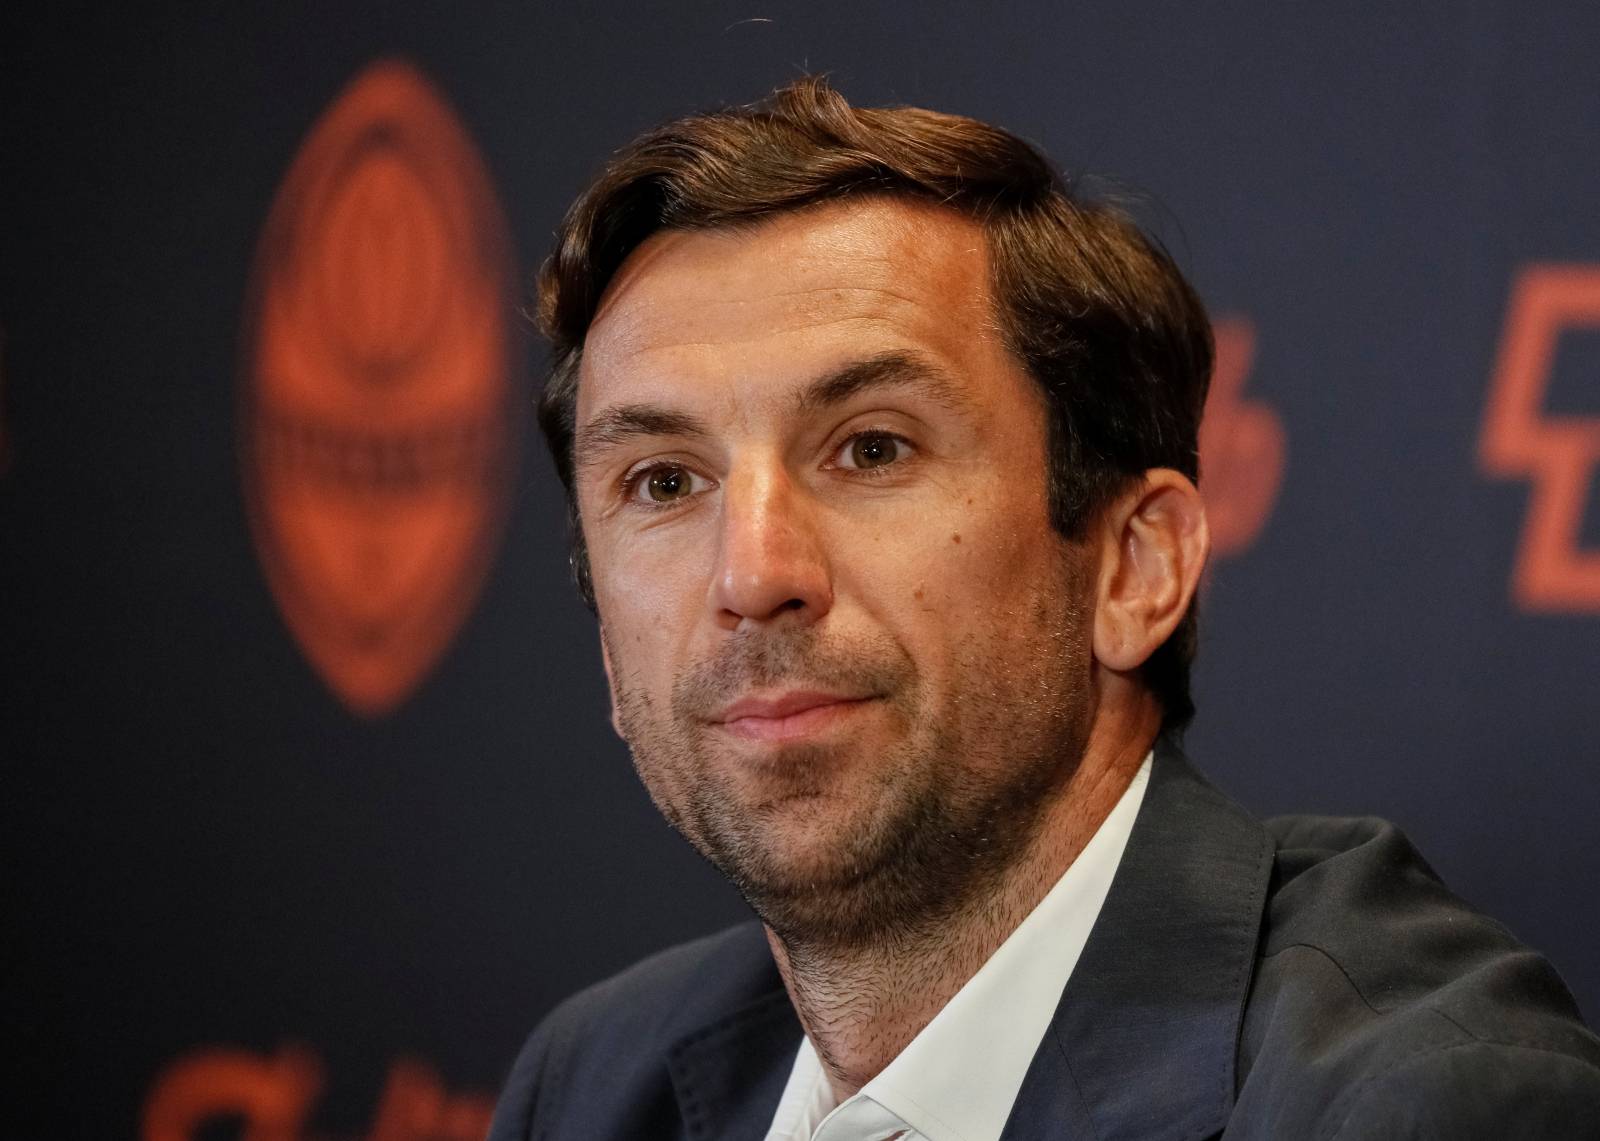 Former captain of Croatian national soccer team, Srna attends a news conference in Kiev